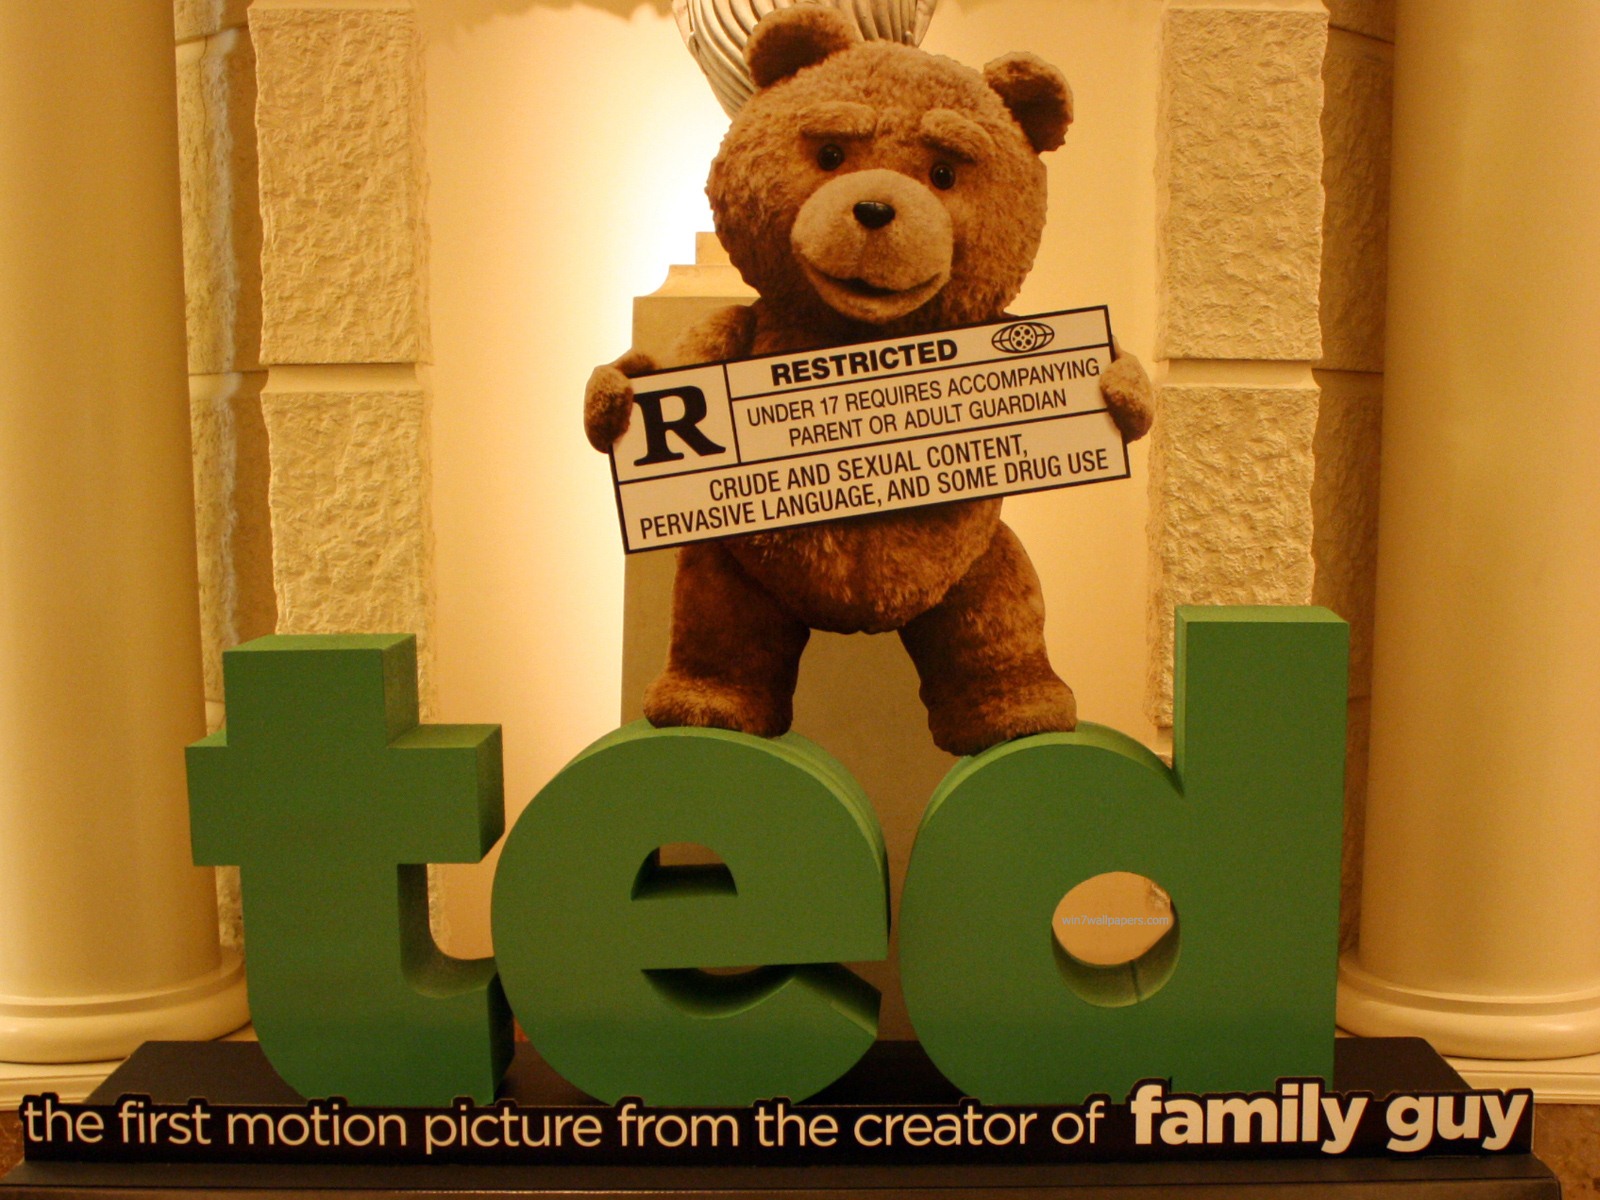 Ted 2012 HD movie wallpapers #7 - 1600x1200